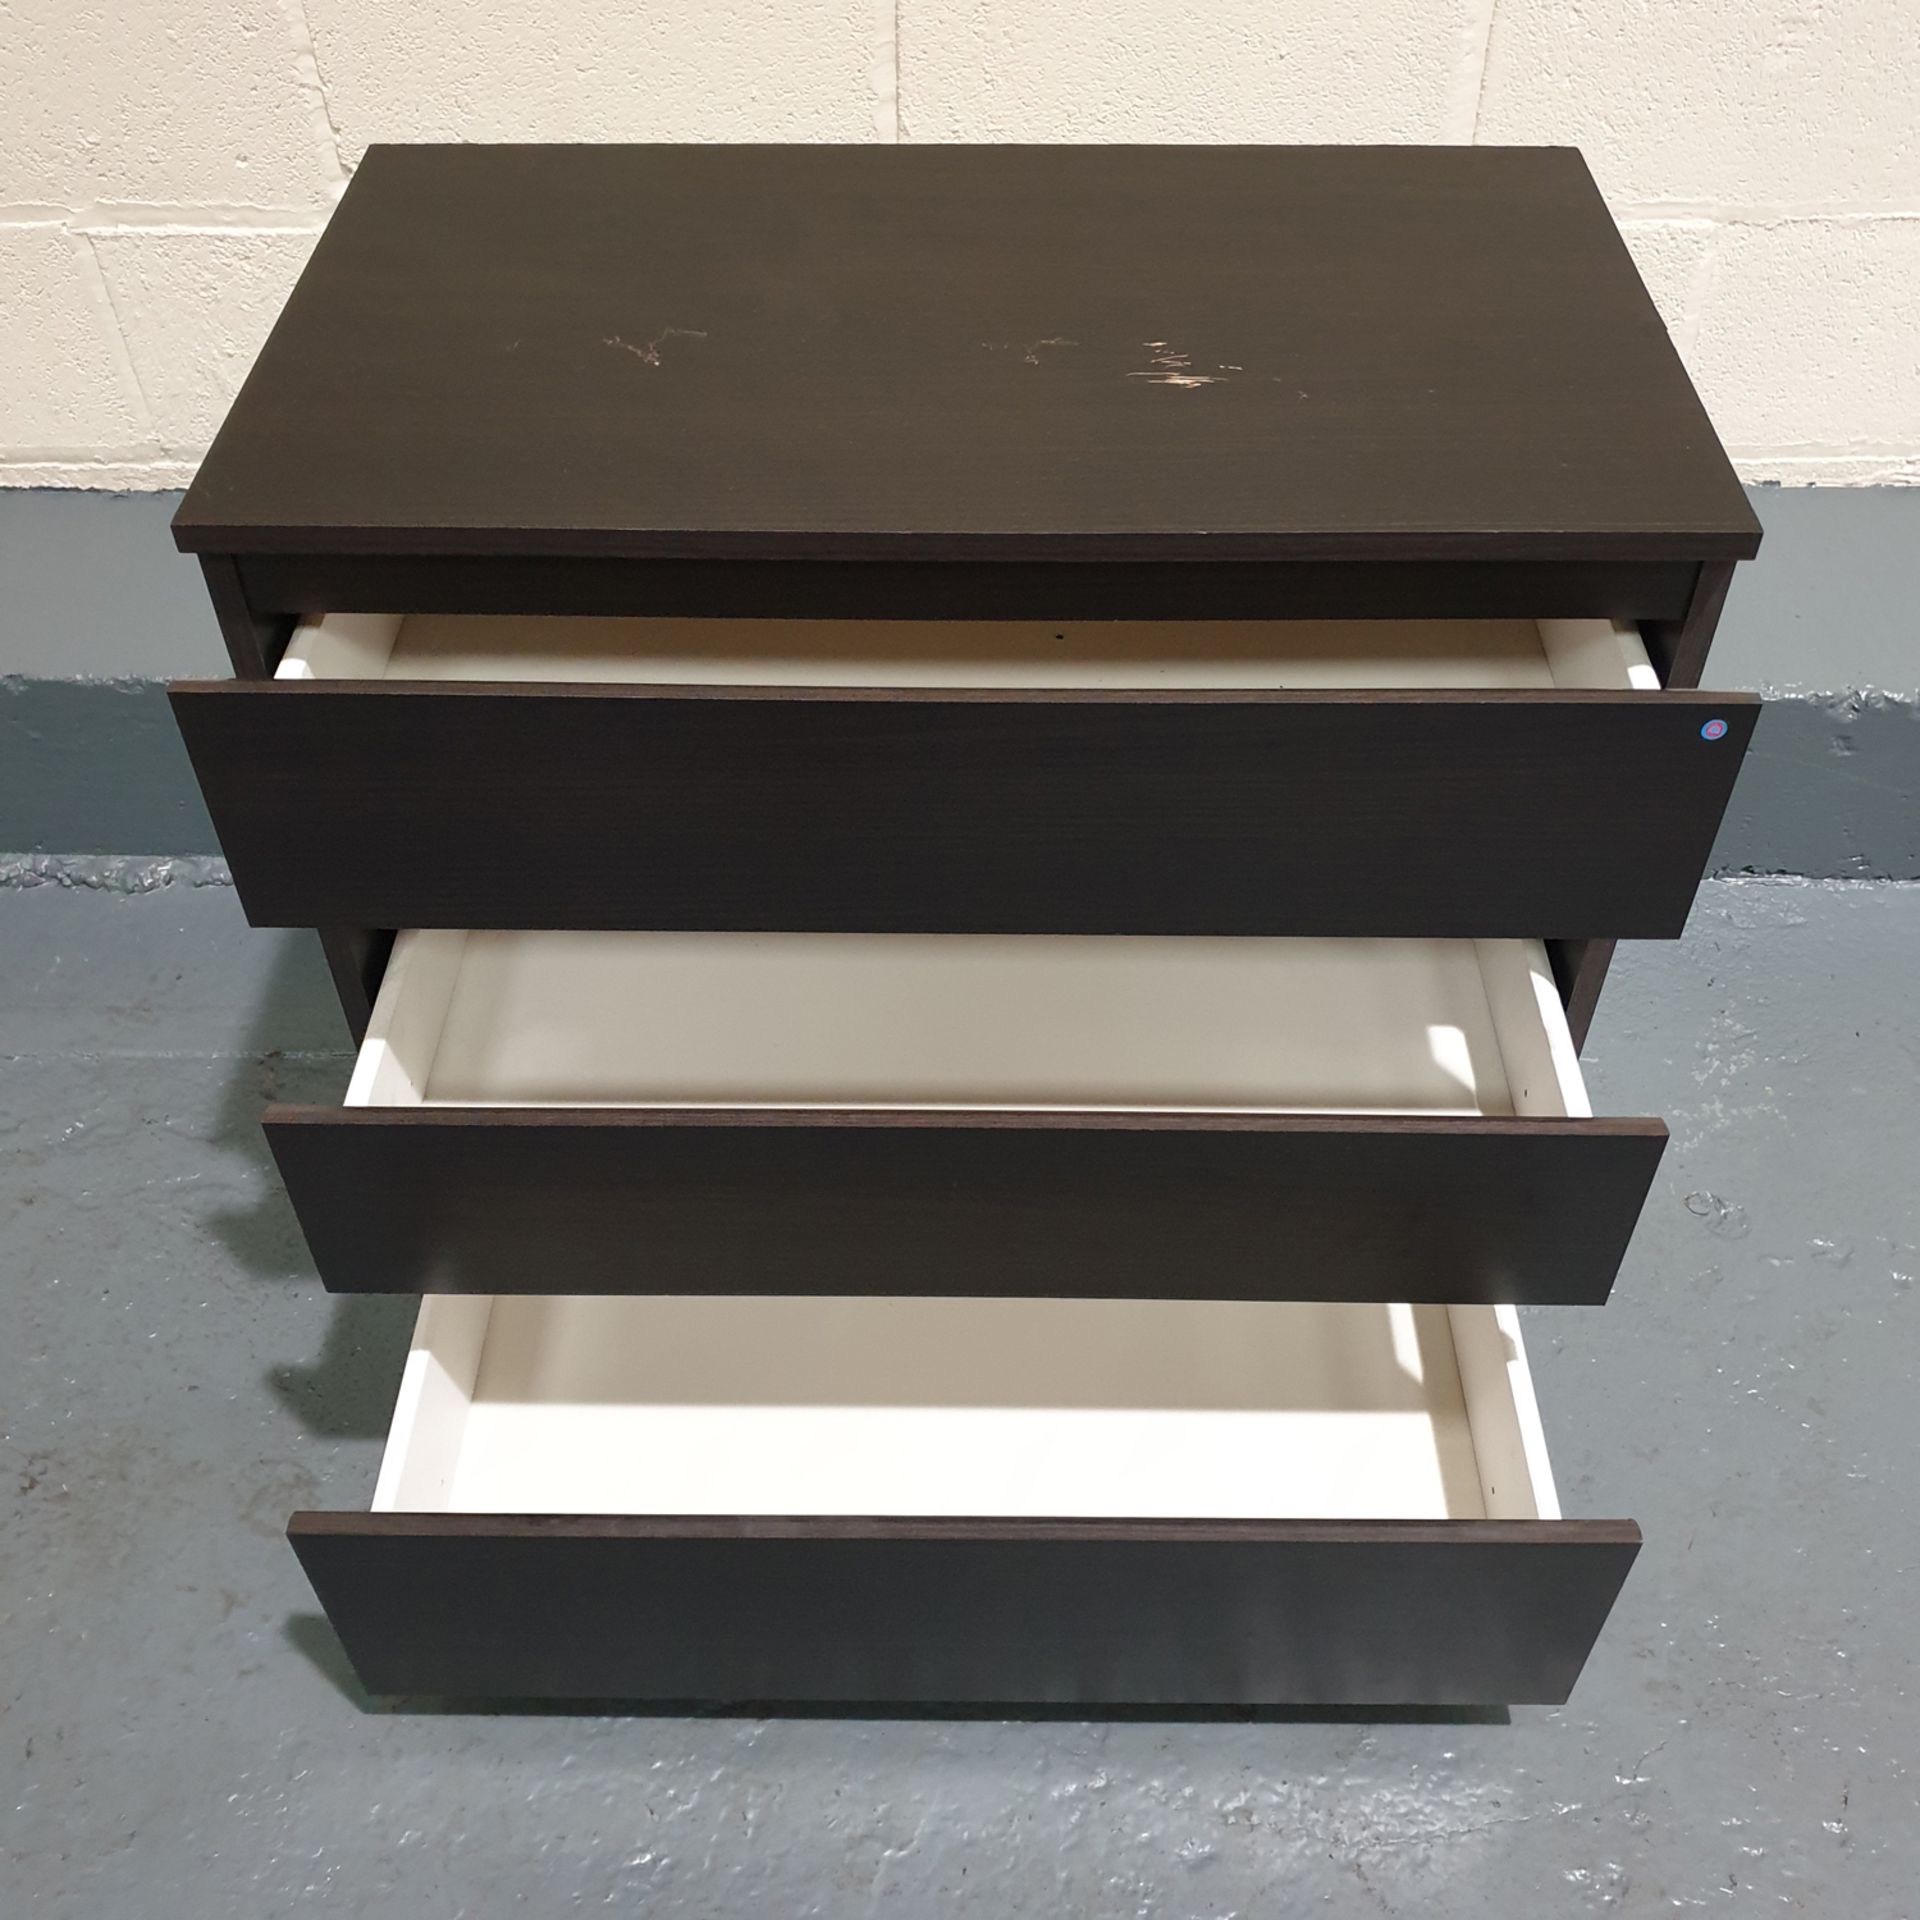 Set of Drawers. Approx Dimensions 700mm x 400mm x 710mm High. - Image 5 of 5